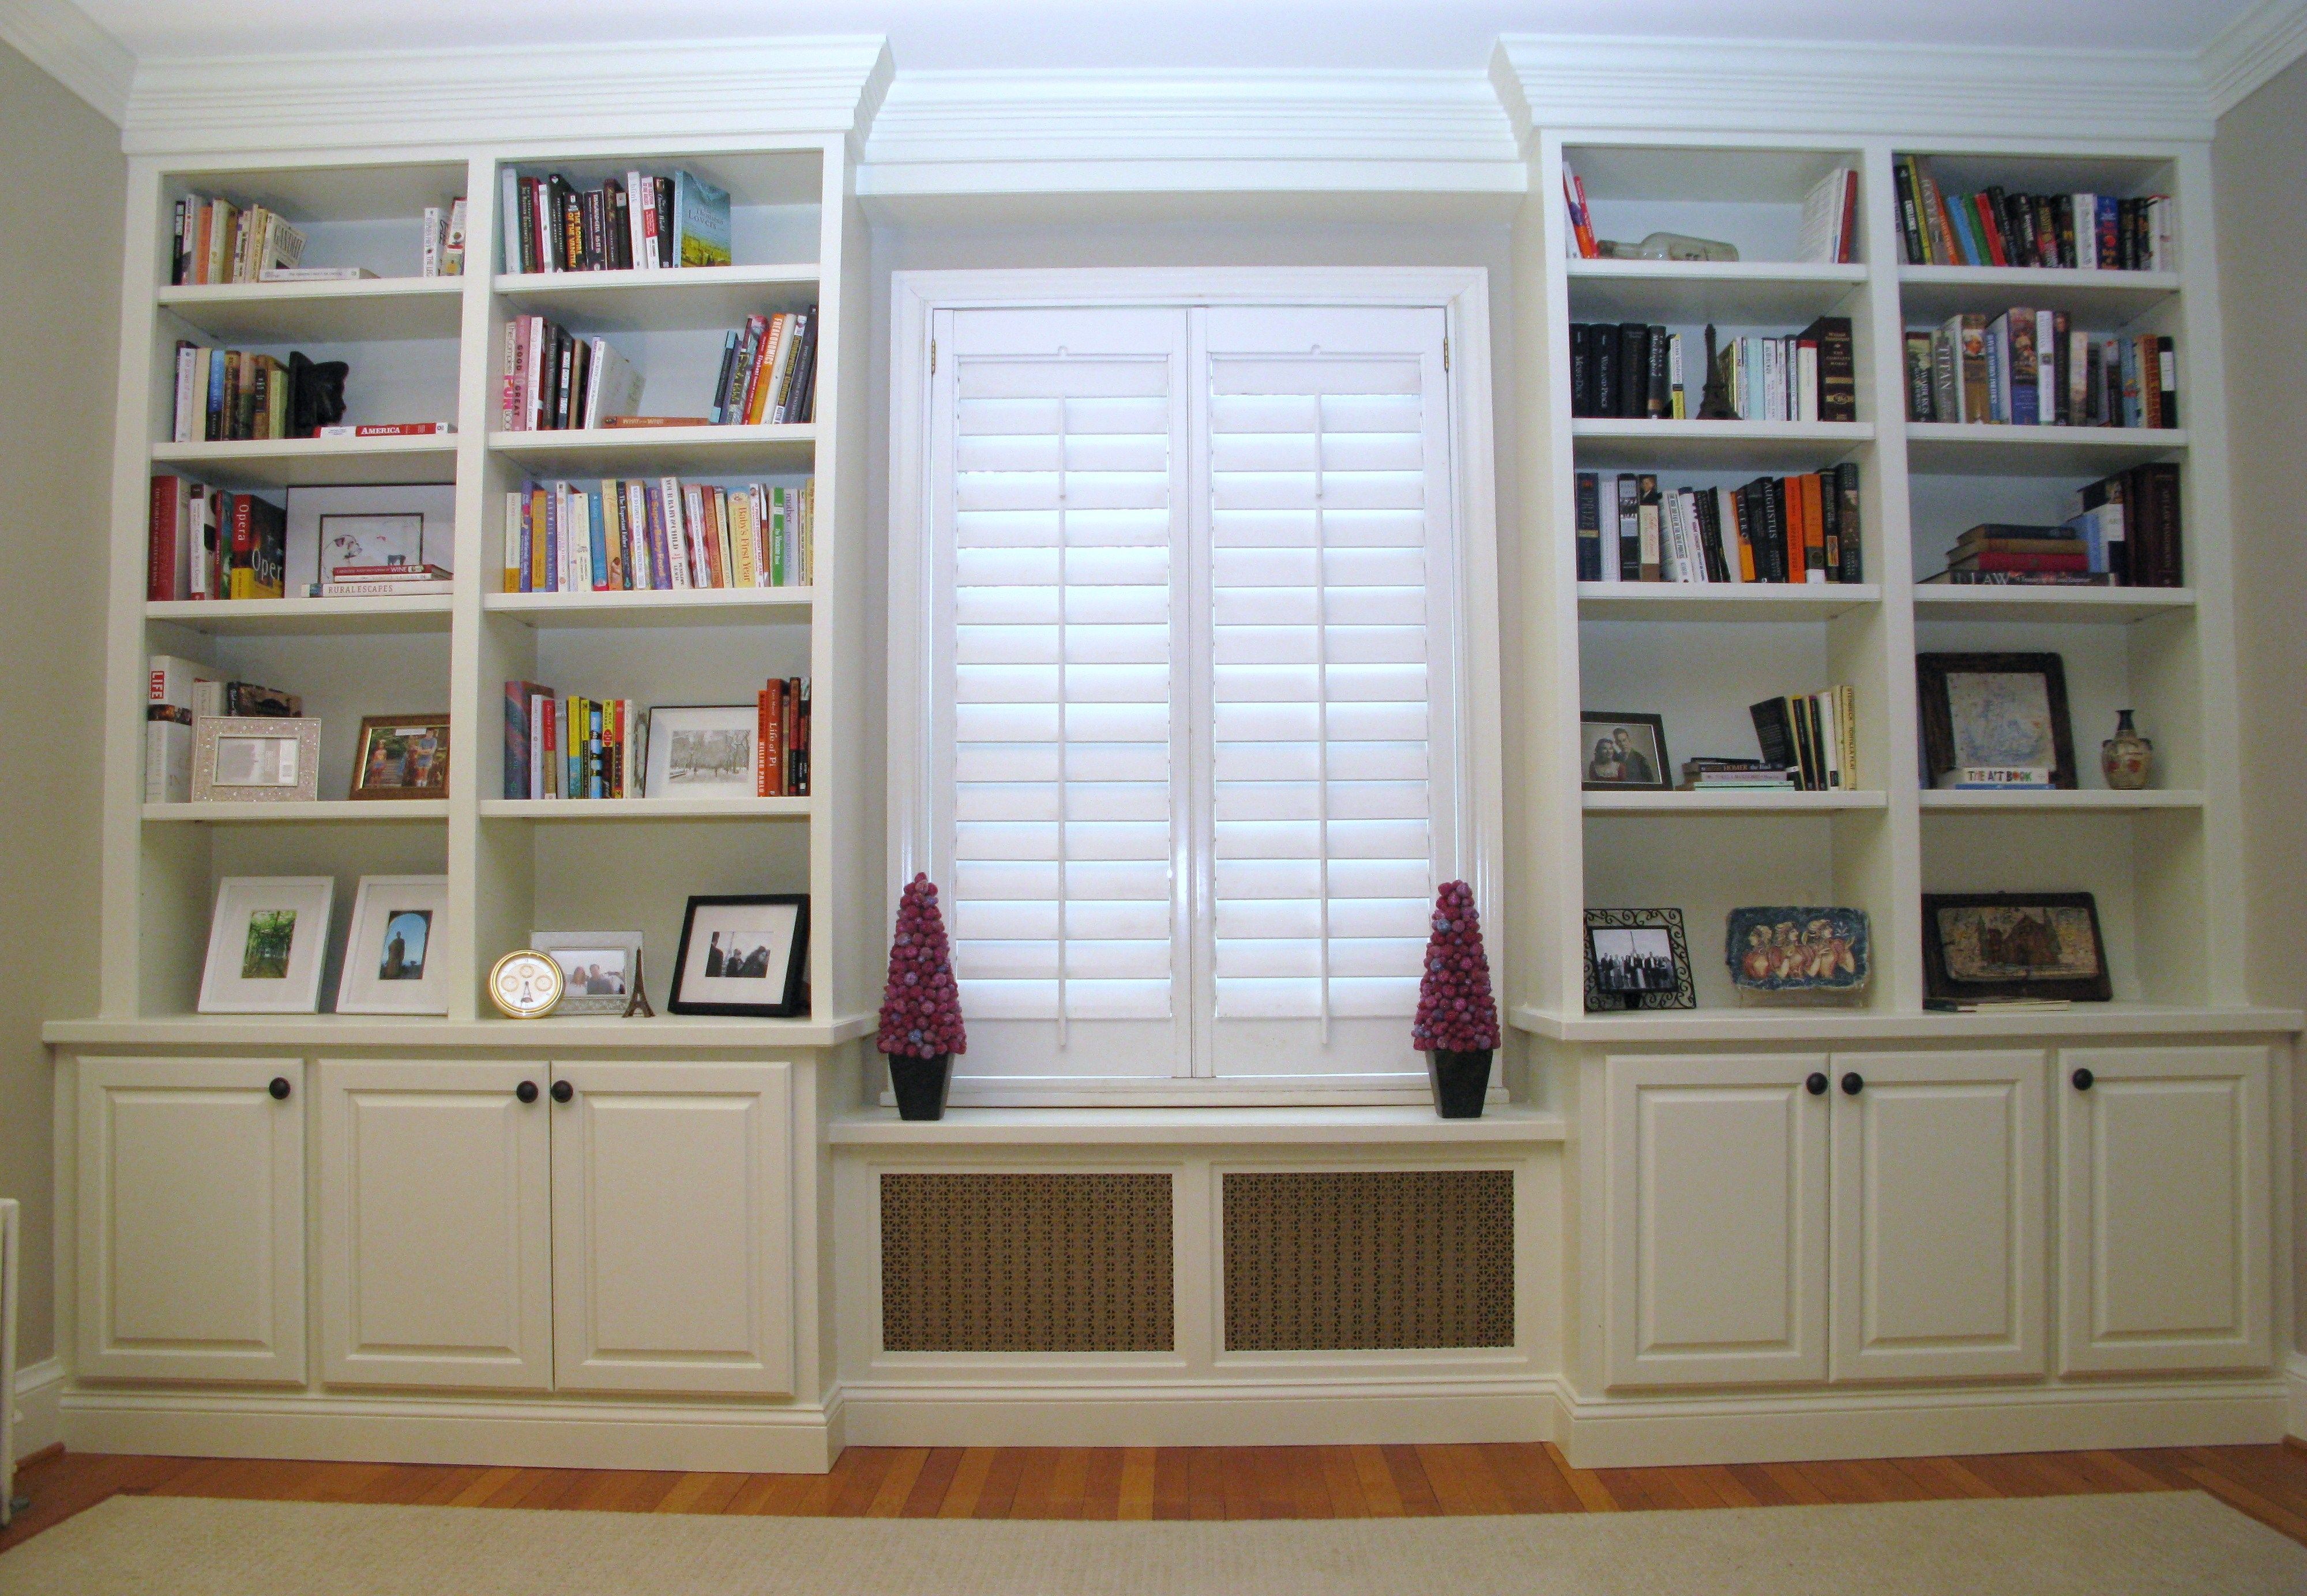 Custom Home Renovations Wasington Dc Archive Four Brothers Llc With Radiator Covers And Bookcases (View 5 of 15)